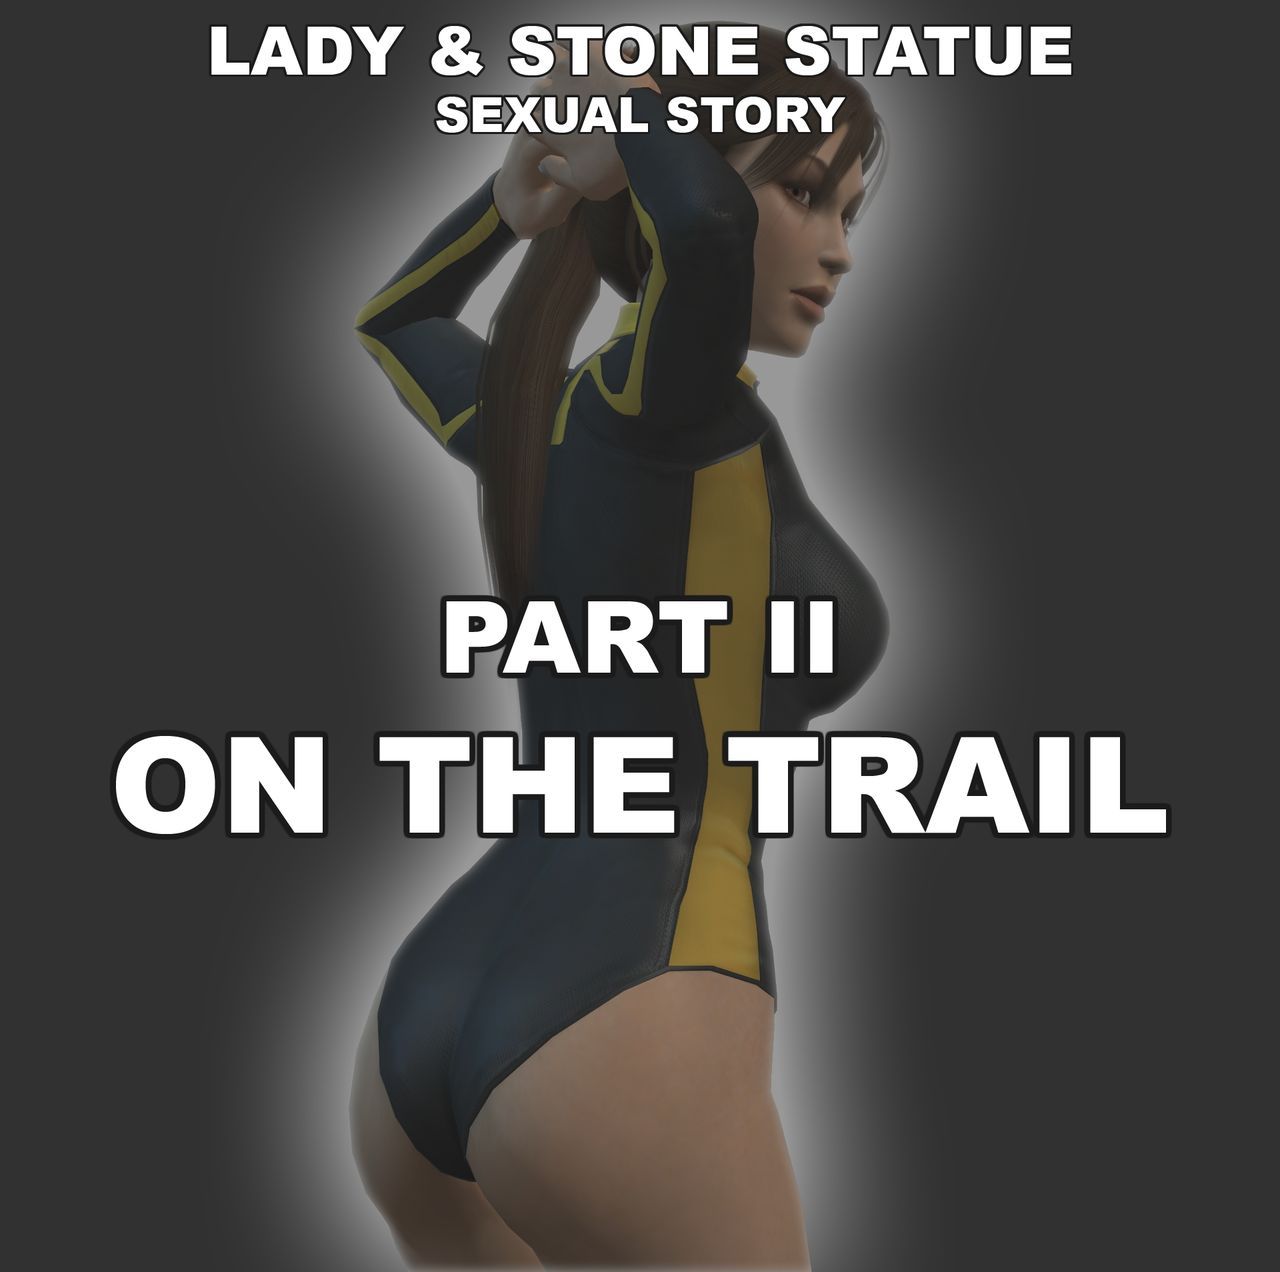 Lady & Stone Statue - Sexual Story Part II of III 3